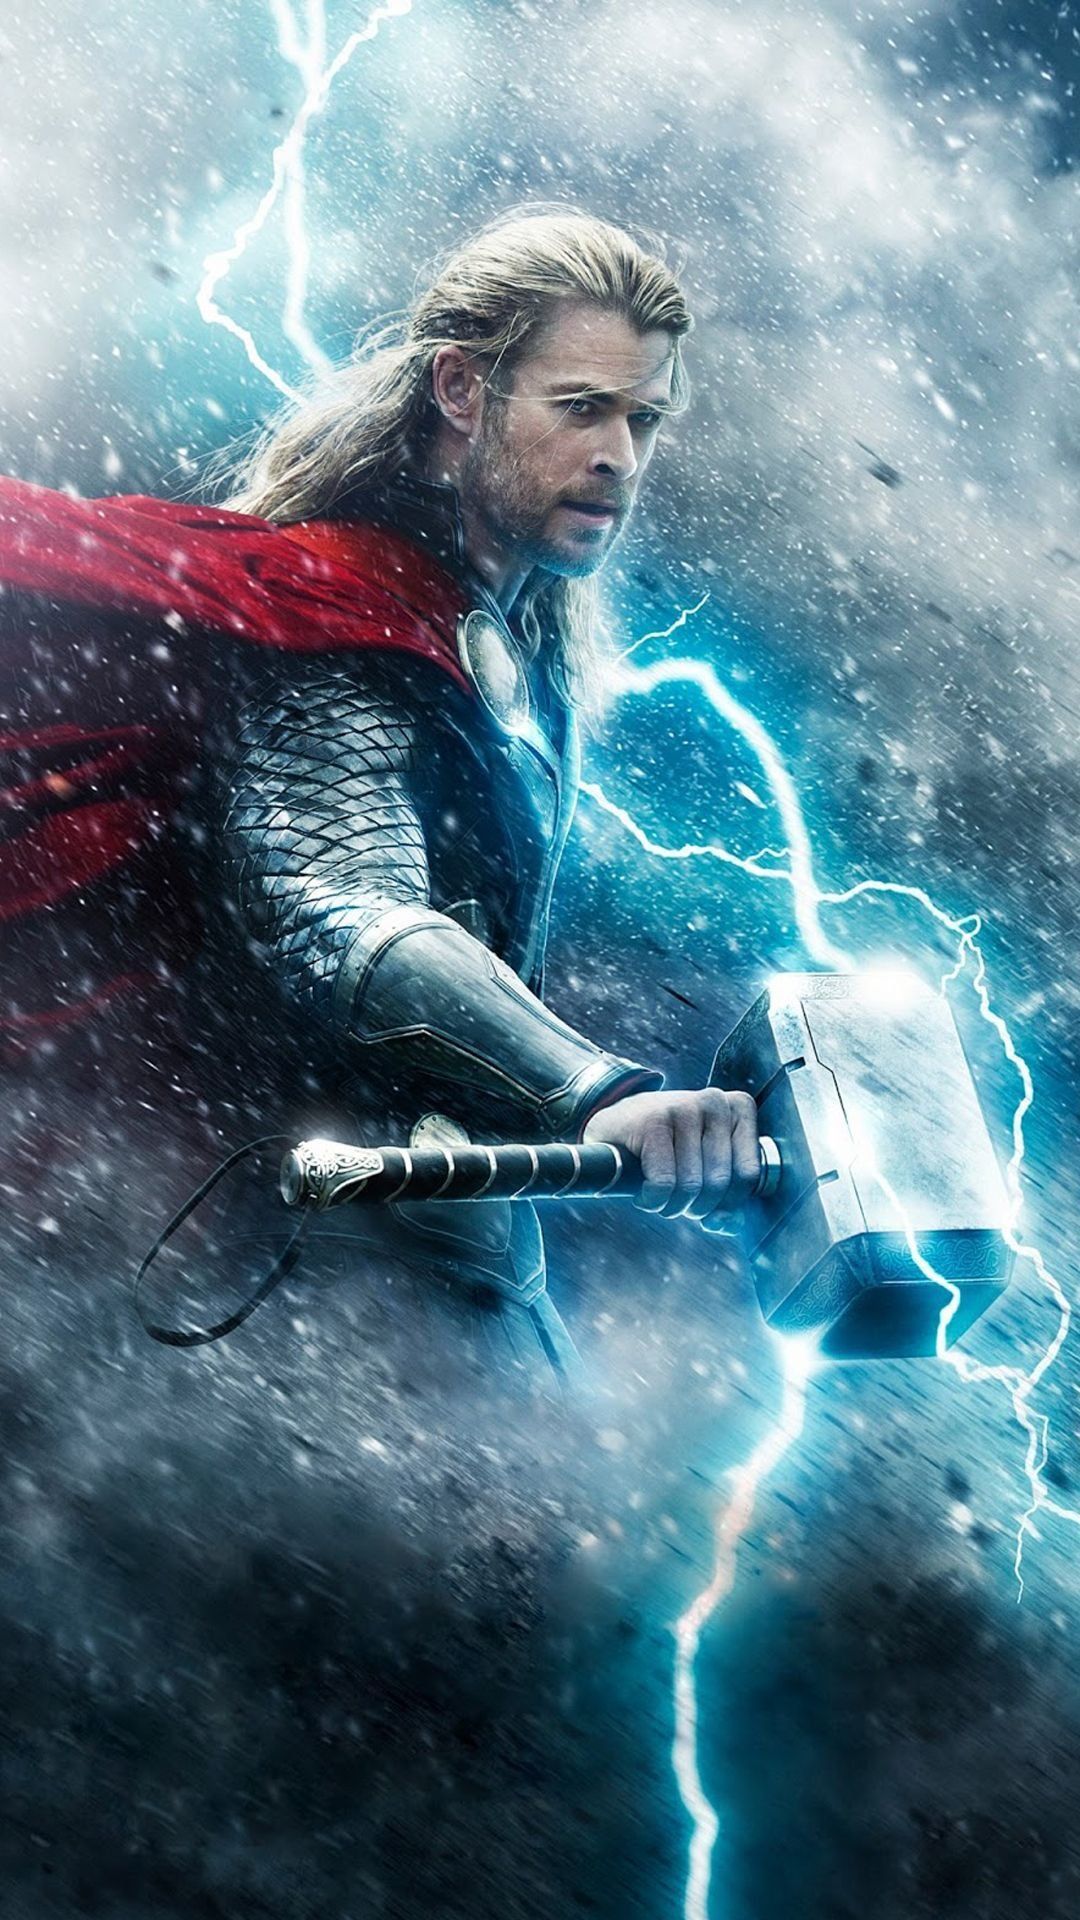 35+ Best Thor Ragnarok Wallpapers For PC And Smartphones - Templatefor